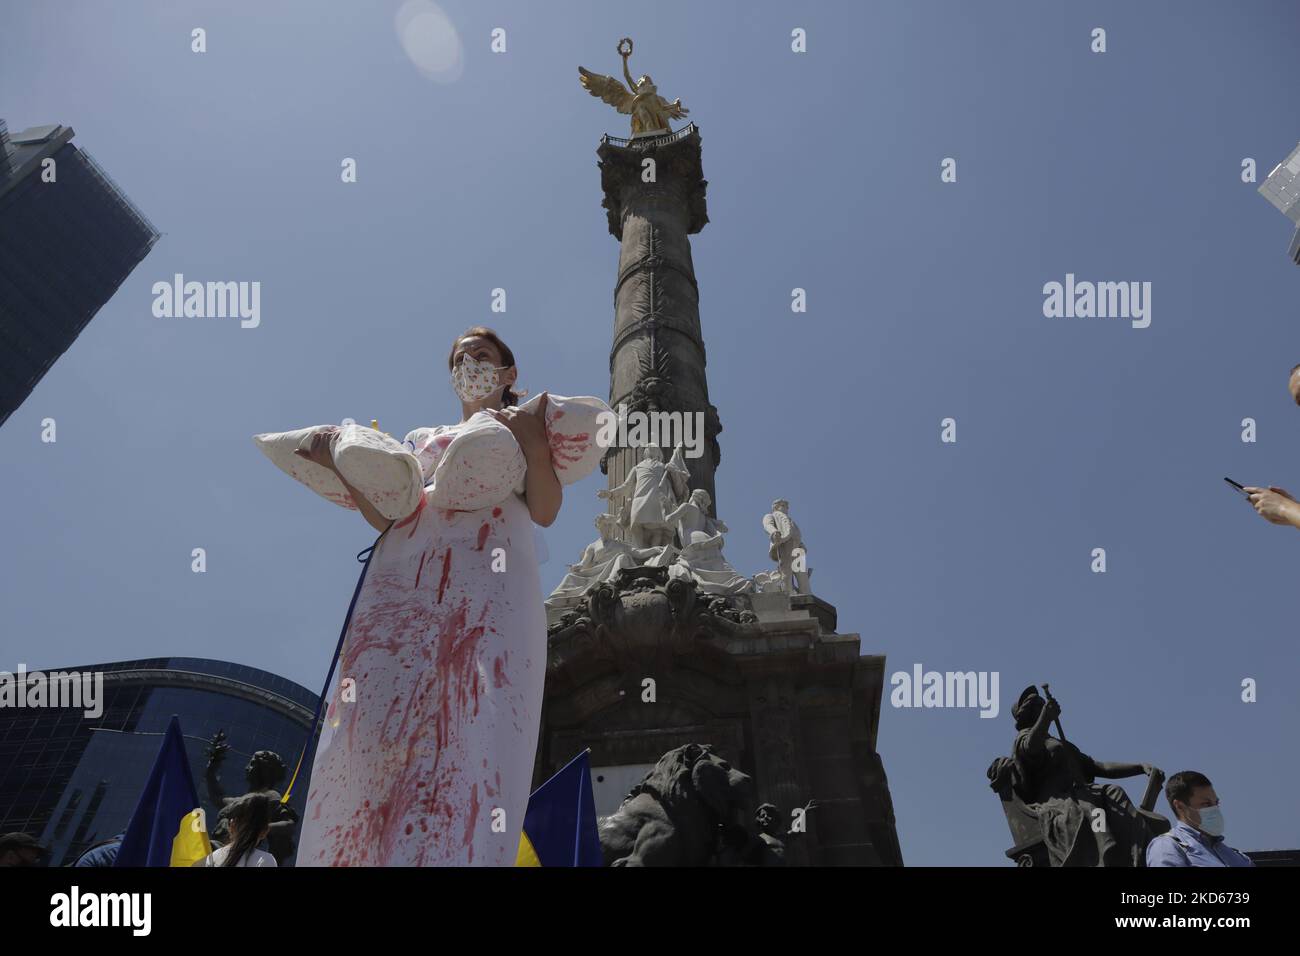 A woman from the Ukrainian community in Mexico City demonstrates at the Angel de la Independencia column against Russian President Vladimir Putin, after he ordered the start of a military strategy in several Ukrainian cities. (Photo by Gerardo Vieyra/NurPhoto) Stock Photo